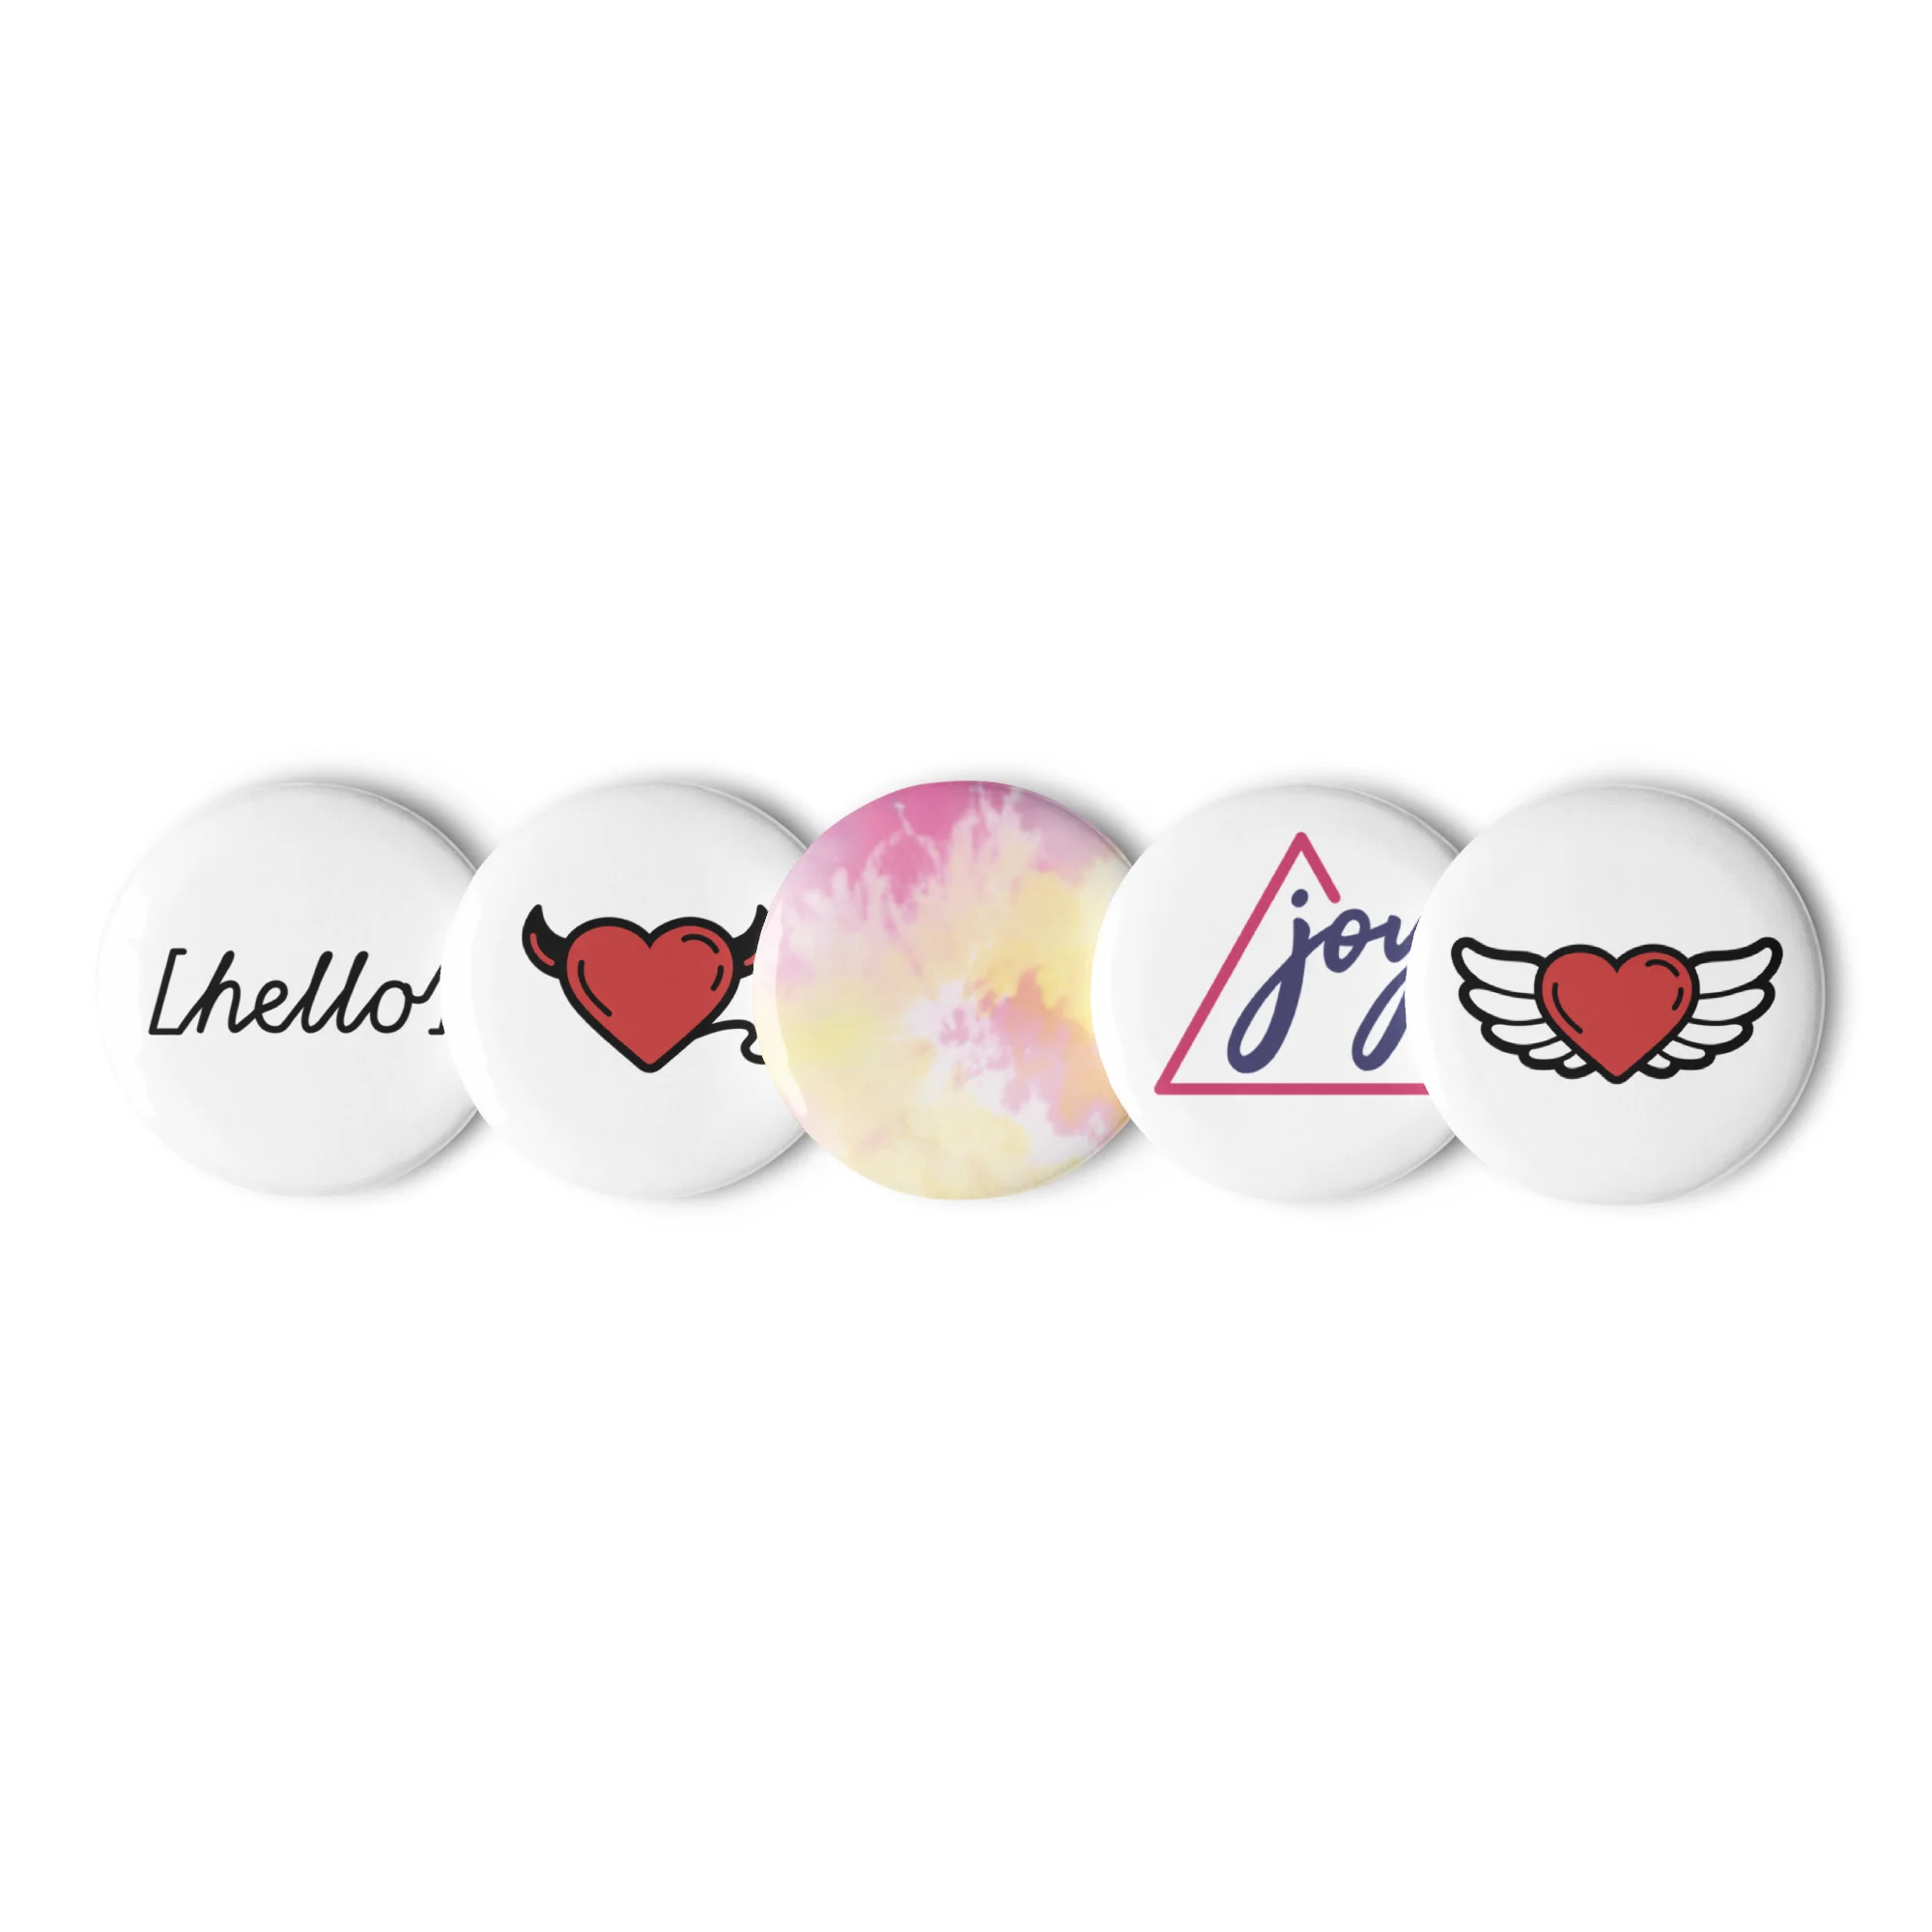 Cool Girls’ Set Of Pin Buttons-1.25